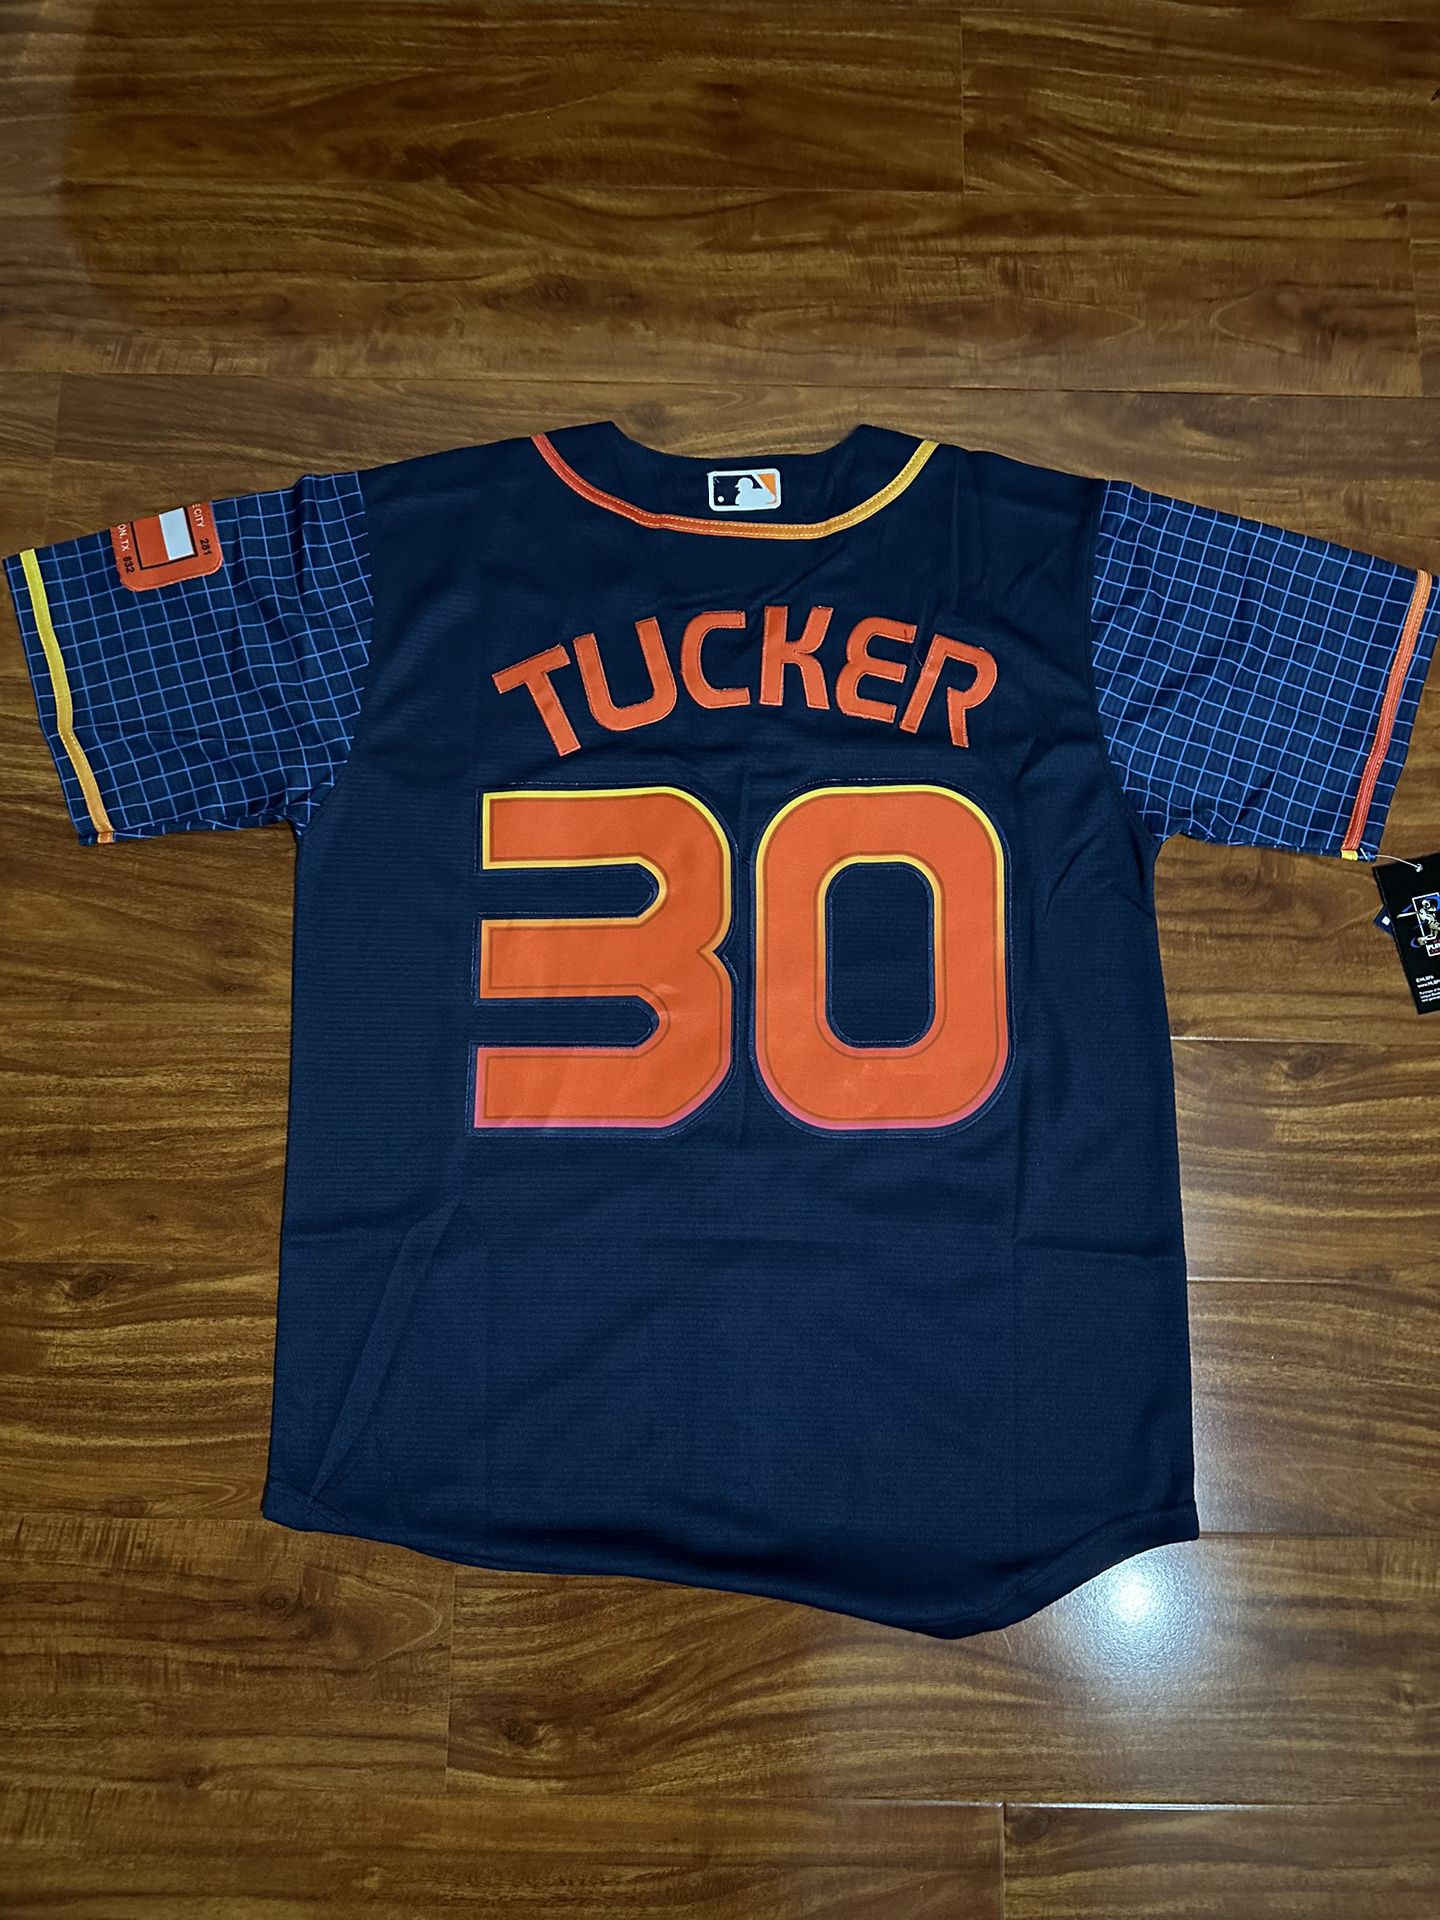 Astros Gold Rush Jersey 2023(Altuve) for Sale in Katy, TX - OfferUp